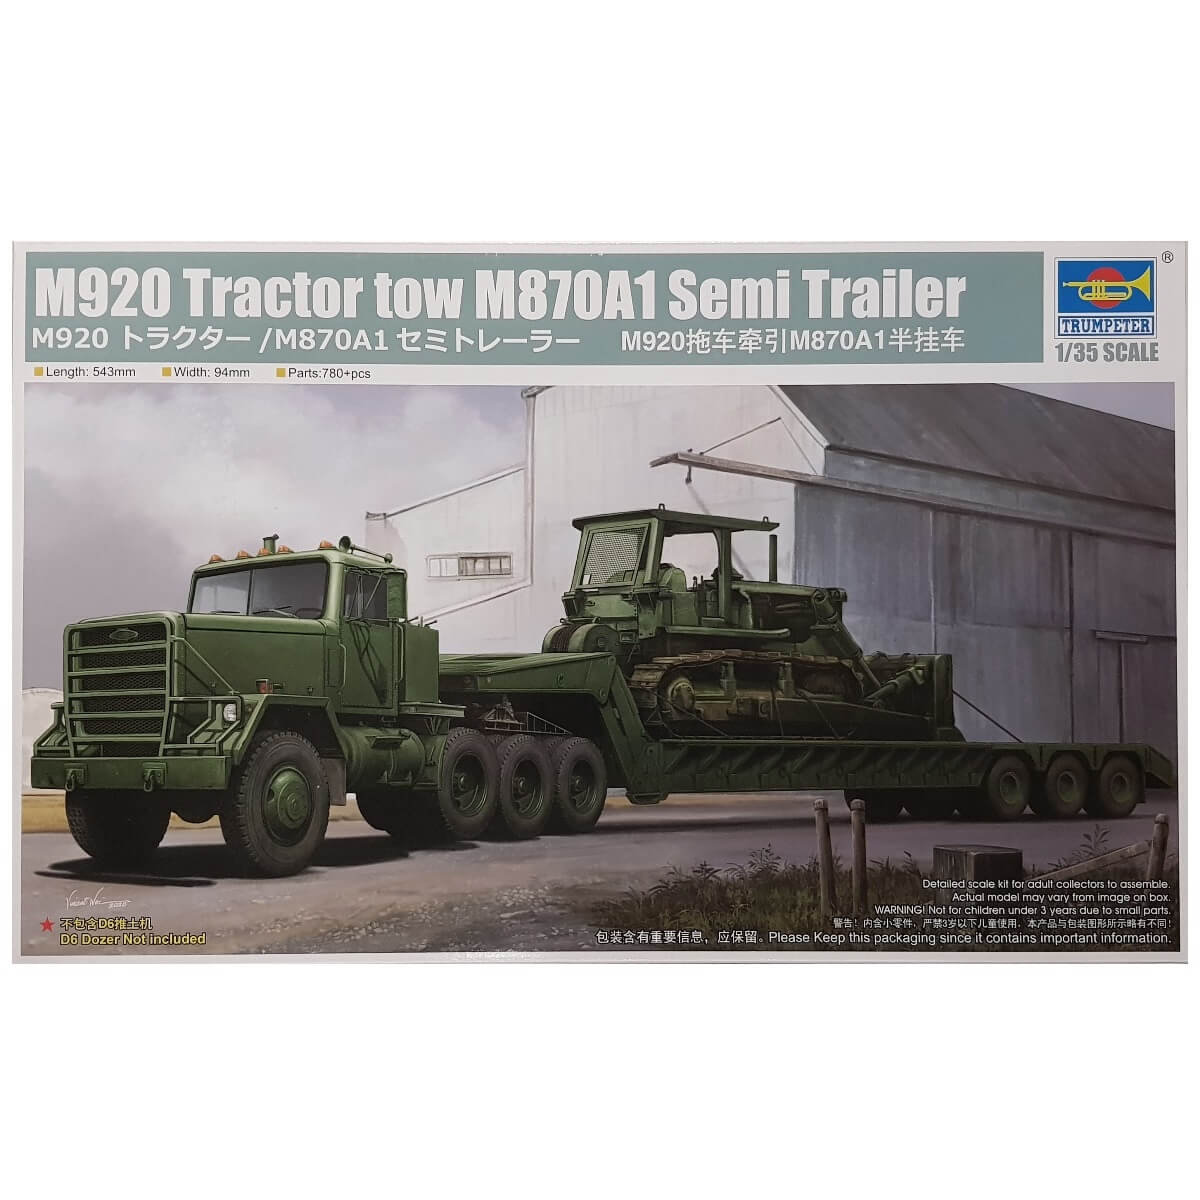 1:35 M920 Tractor tow with M870A1 Semi Trailer - TRUMPETER